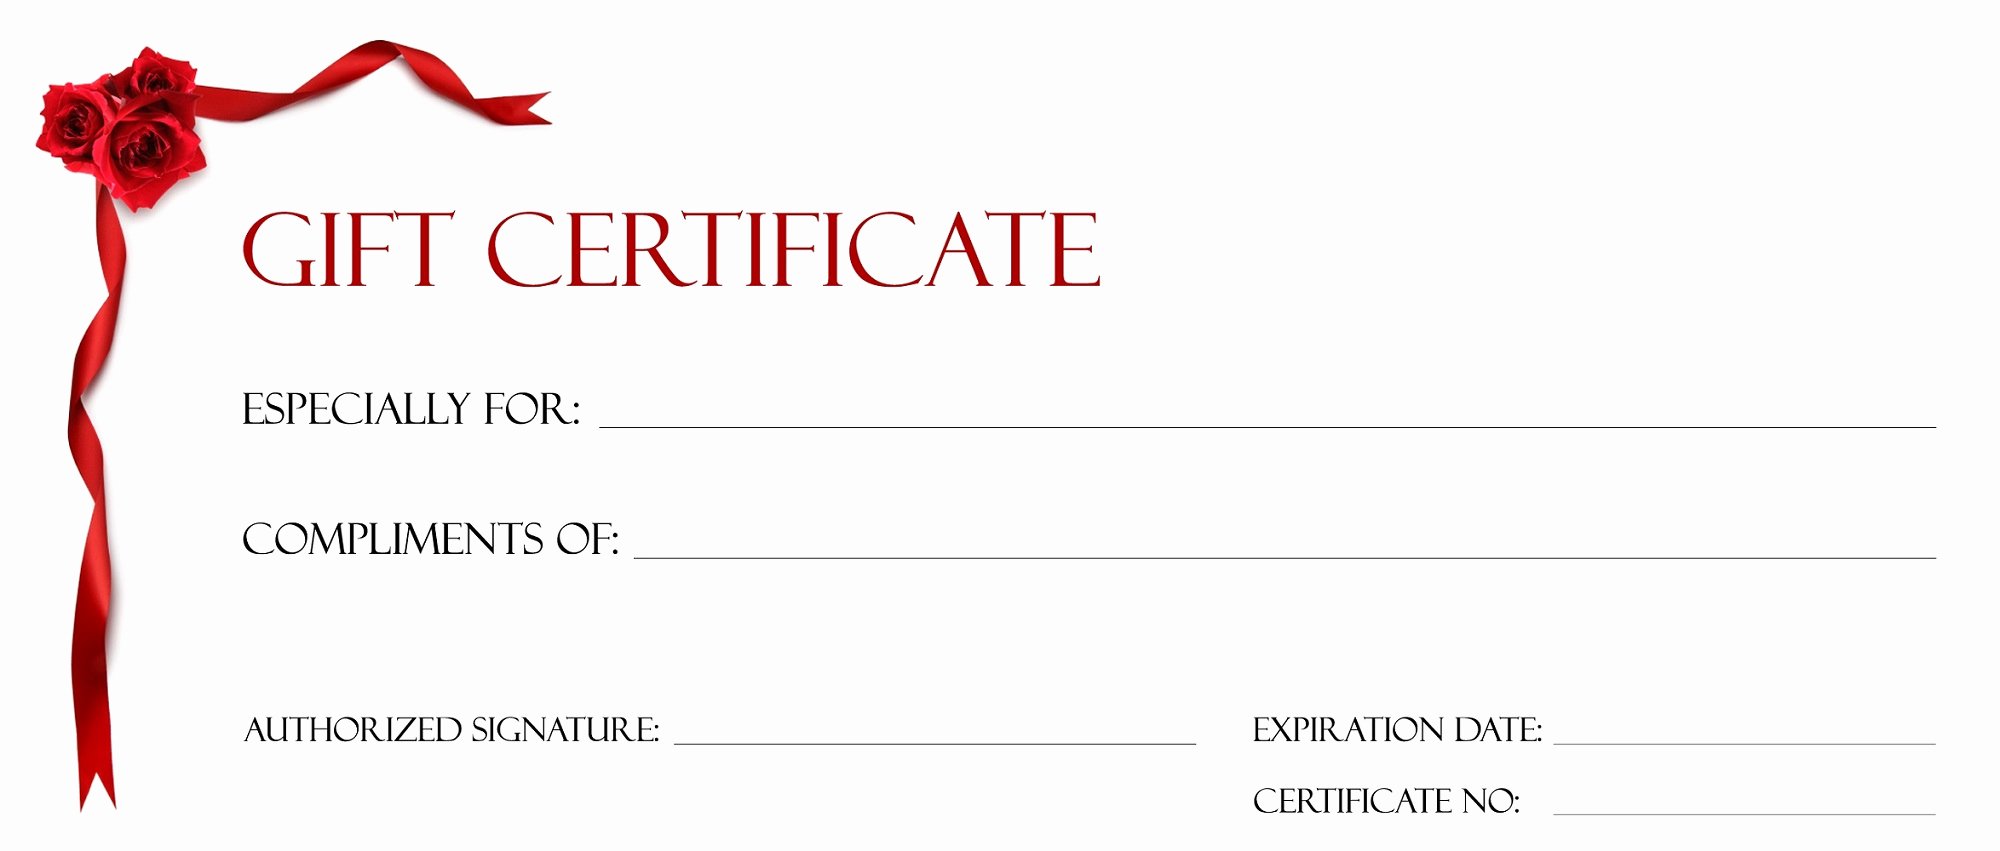 Gift Certificate Template for Kids Blanks